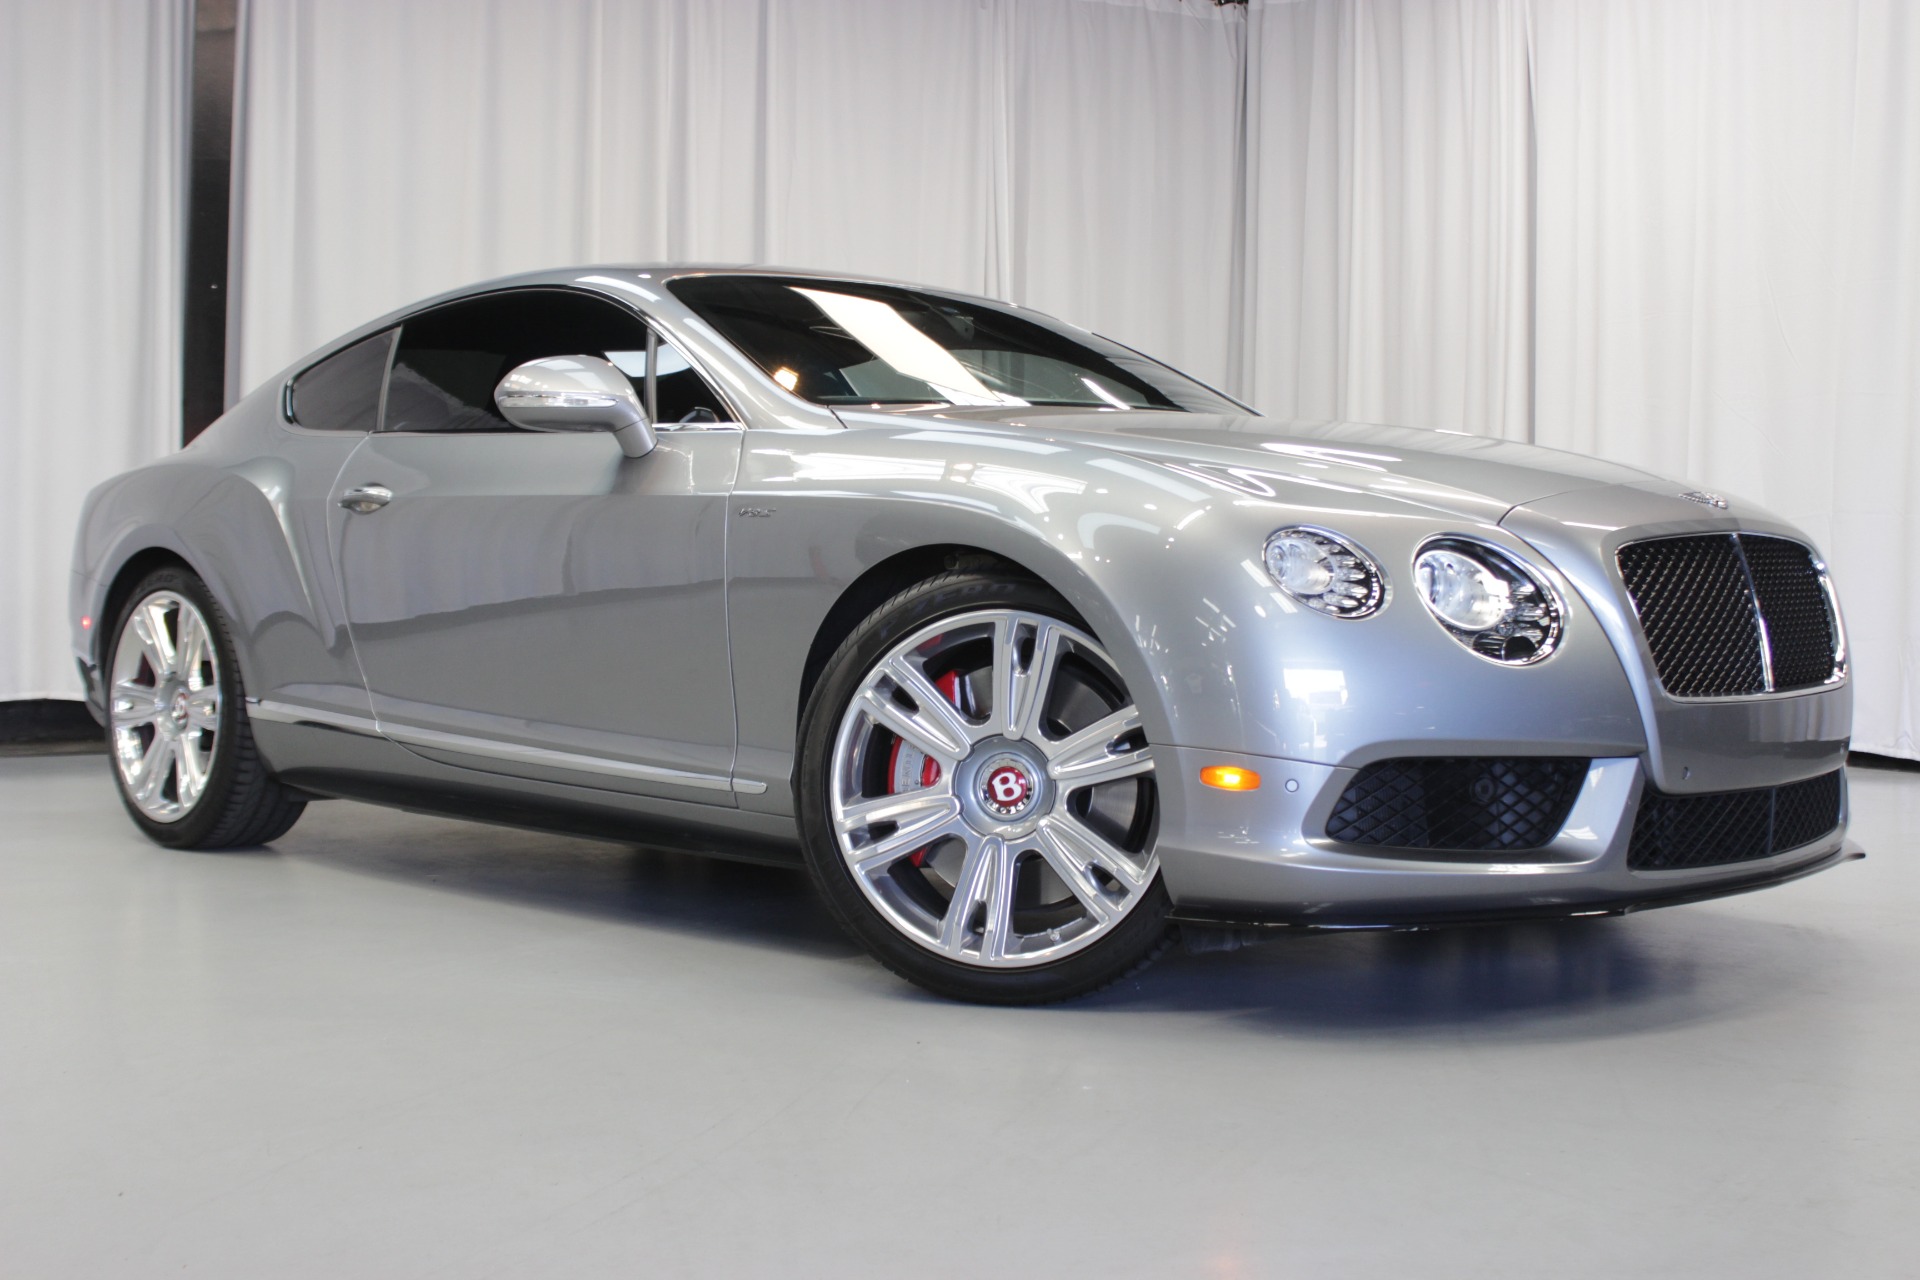 Used 14 Bentley Continental Gt V8 S Gt V8 S For Sale Sold Momentum Motorcars Inc Stock